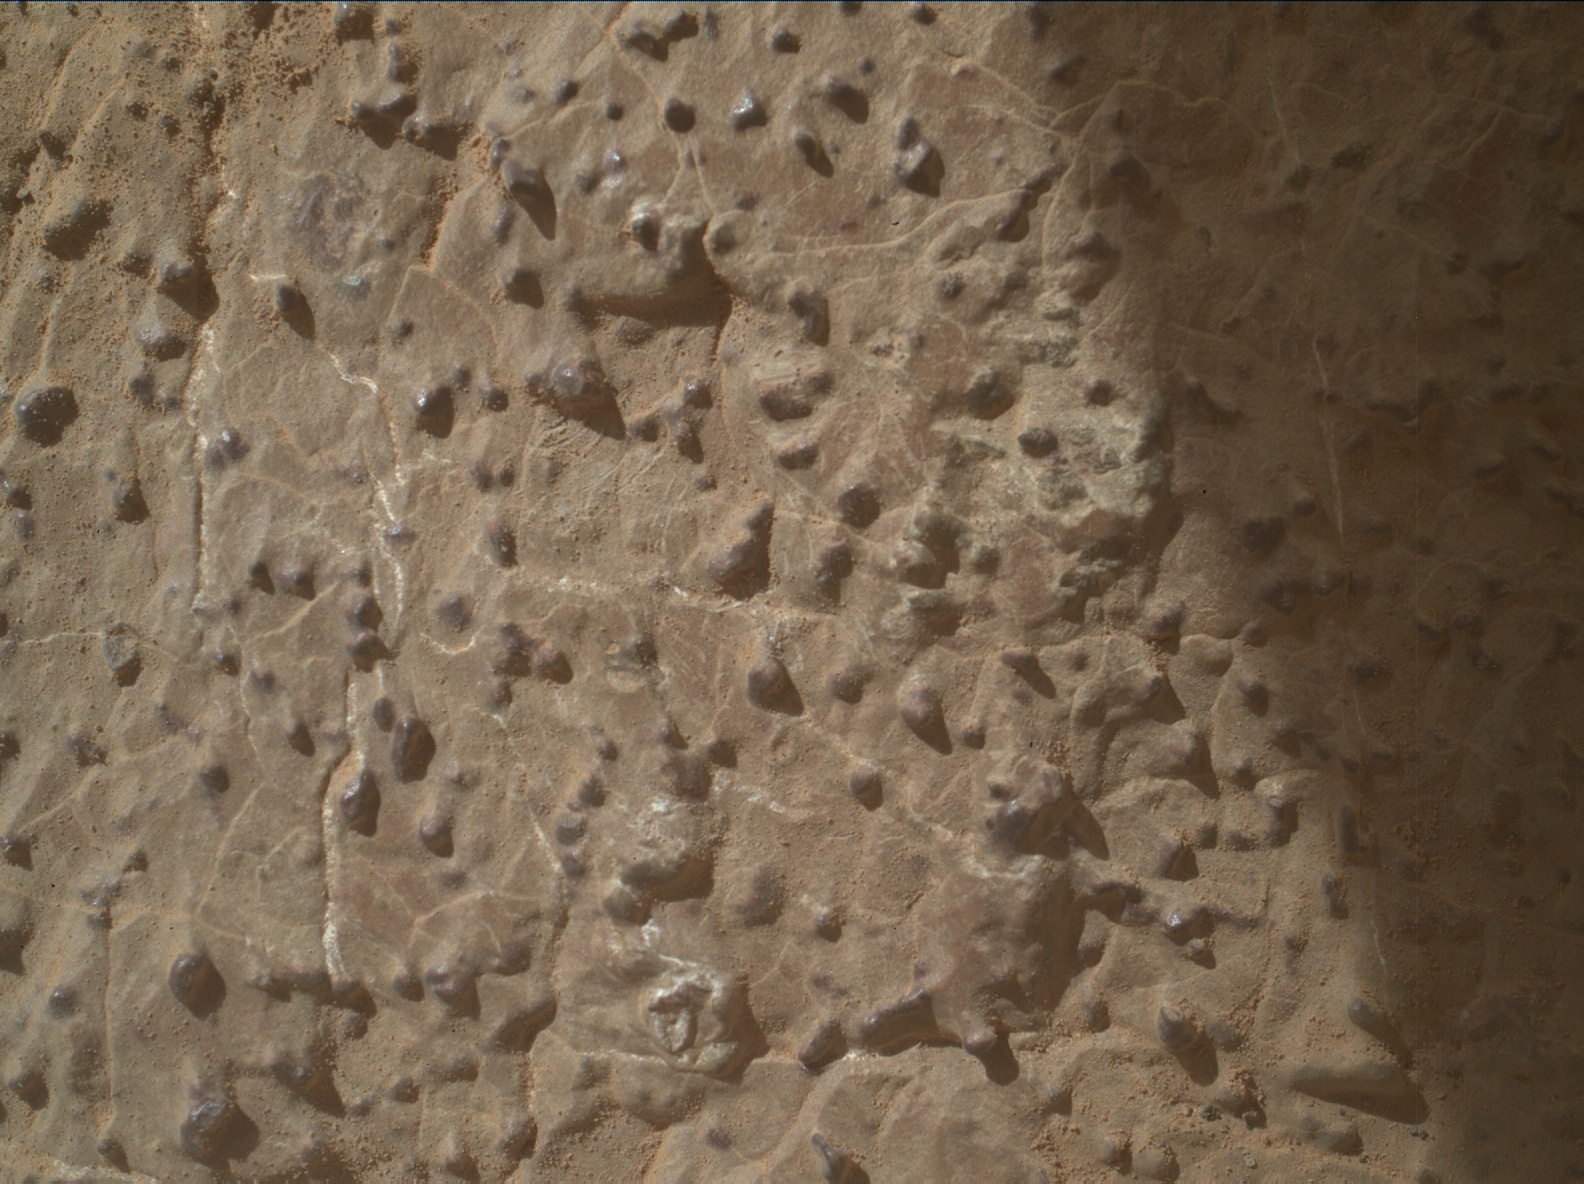 Nasa's Mars rover Curiosity acquired this image using its Mars Hand Lens Imager (MAHLI) on Sol 3037